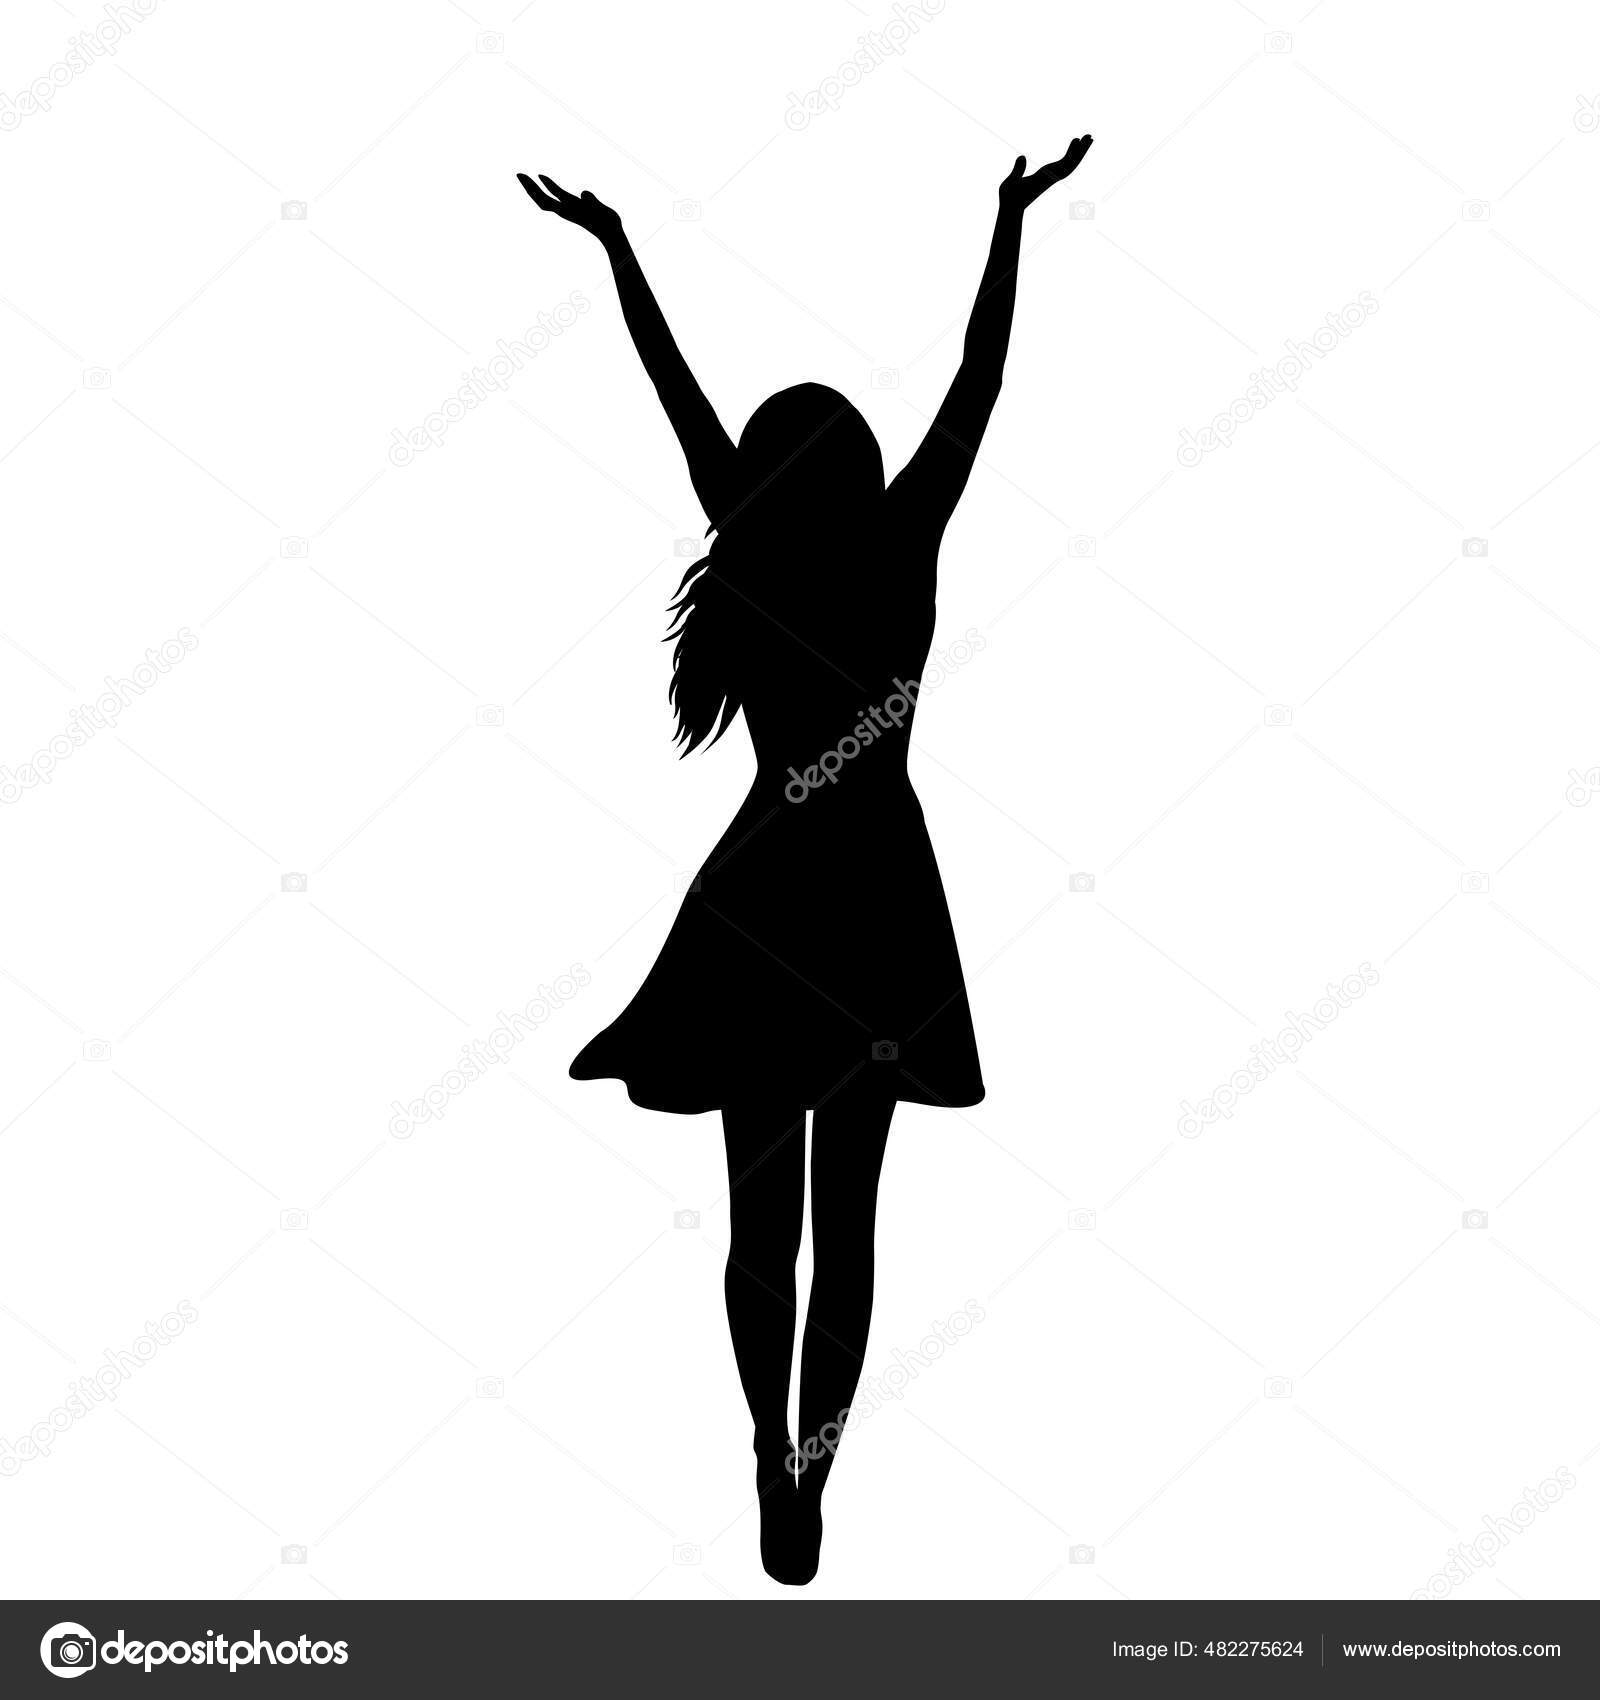 2,036,556 Woman Silhouette Images, Stock Photos, 3D objects